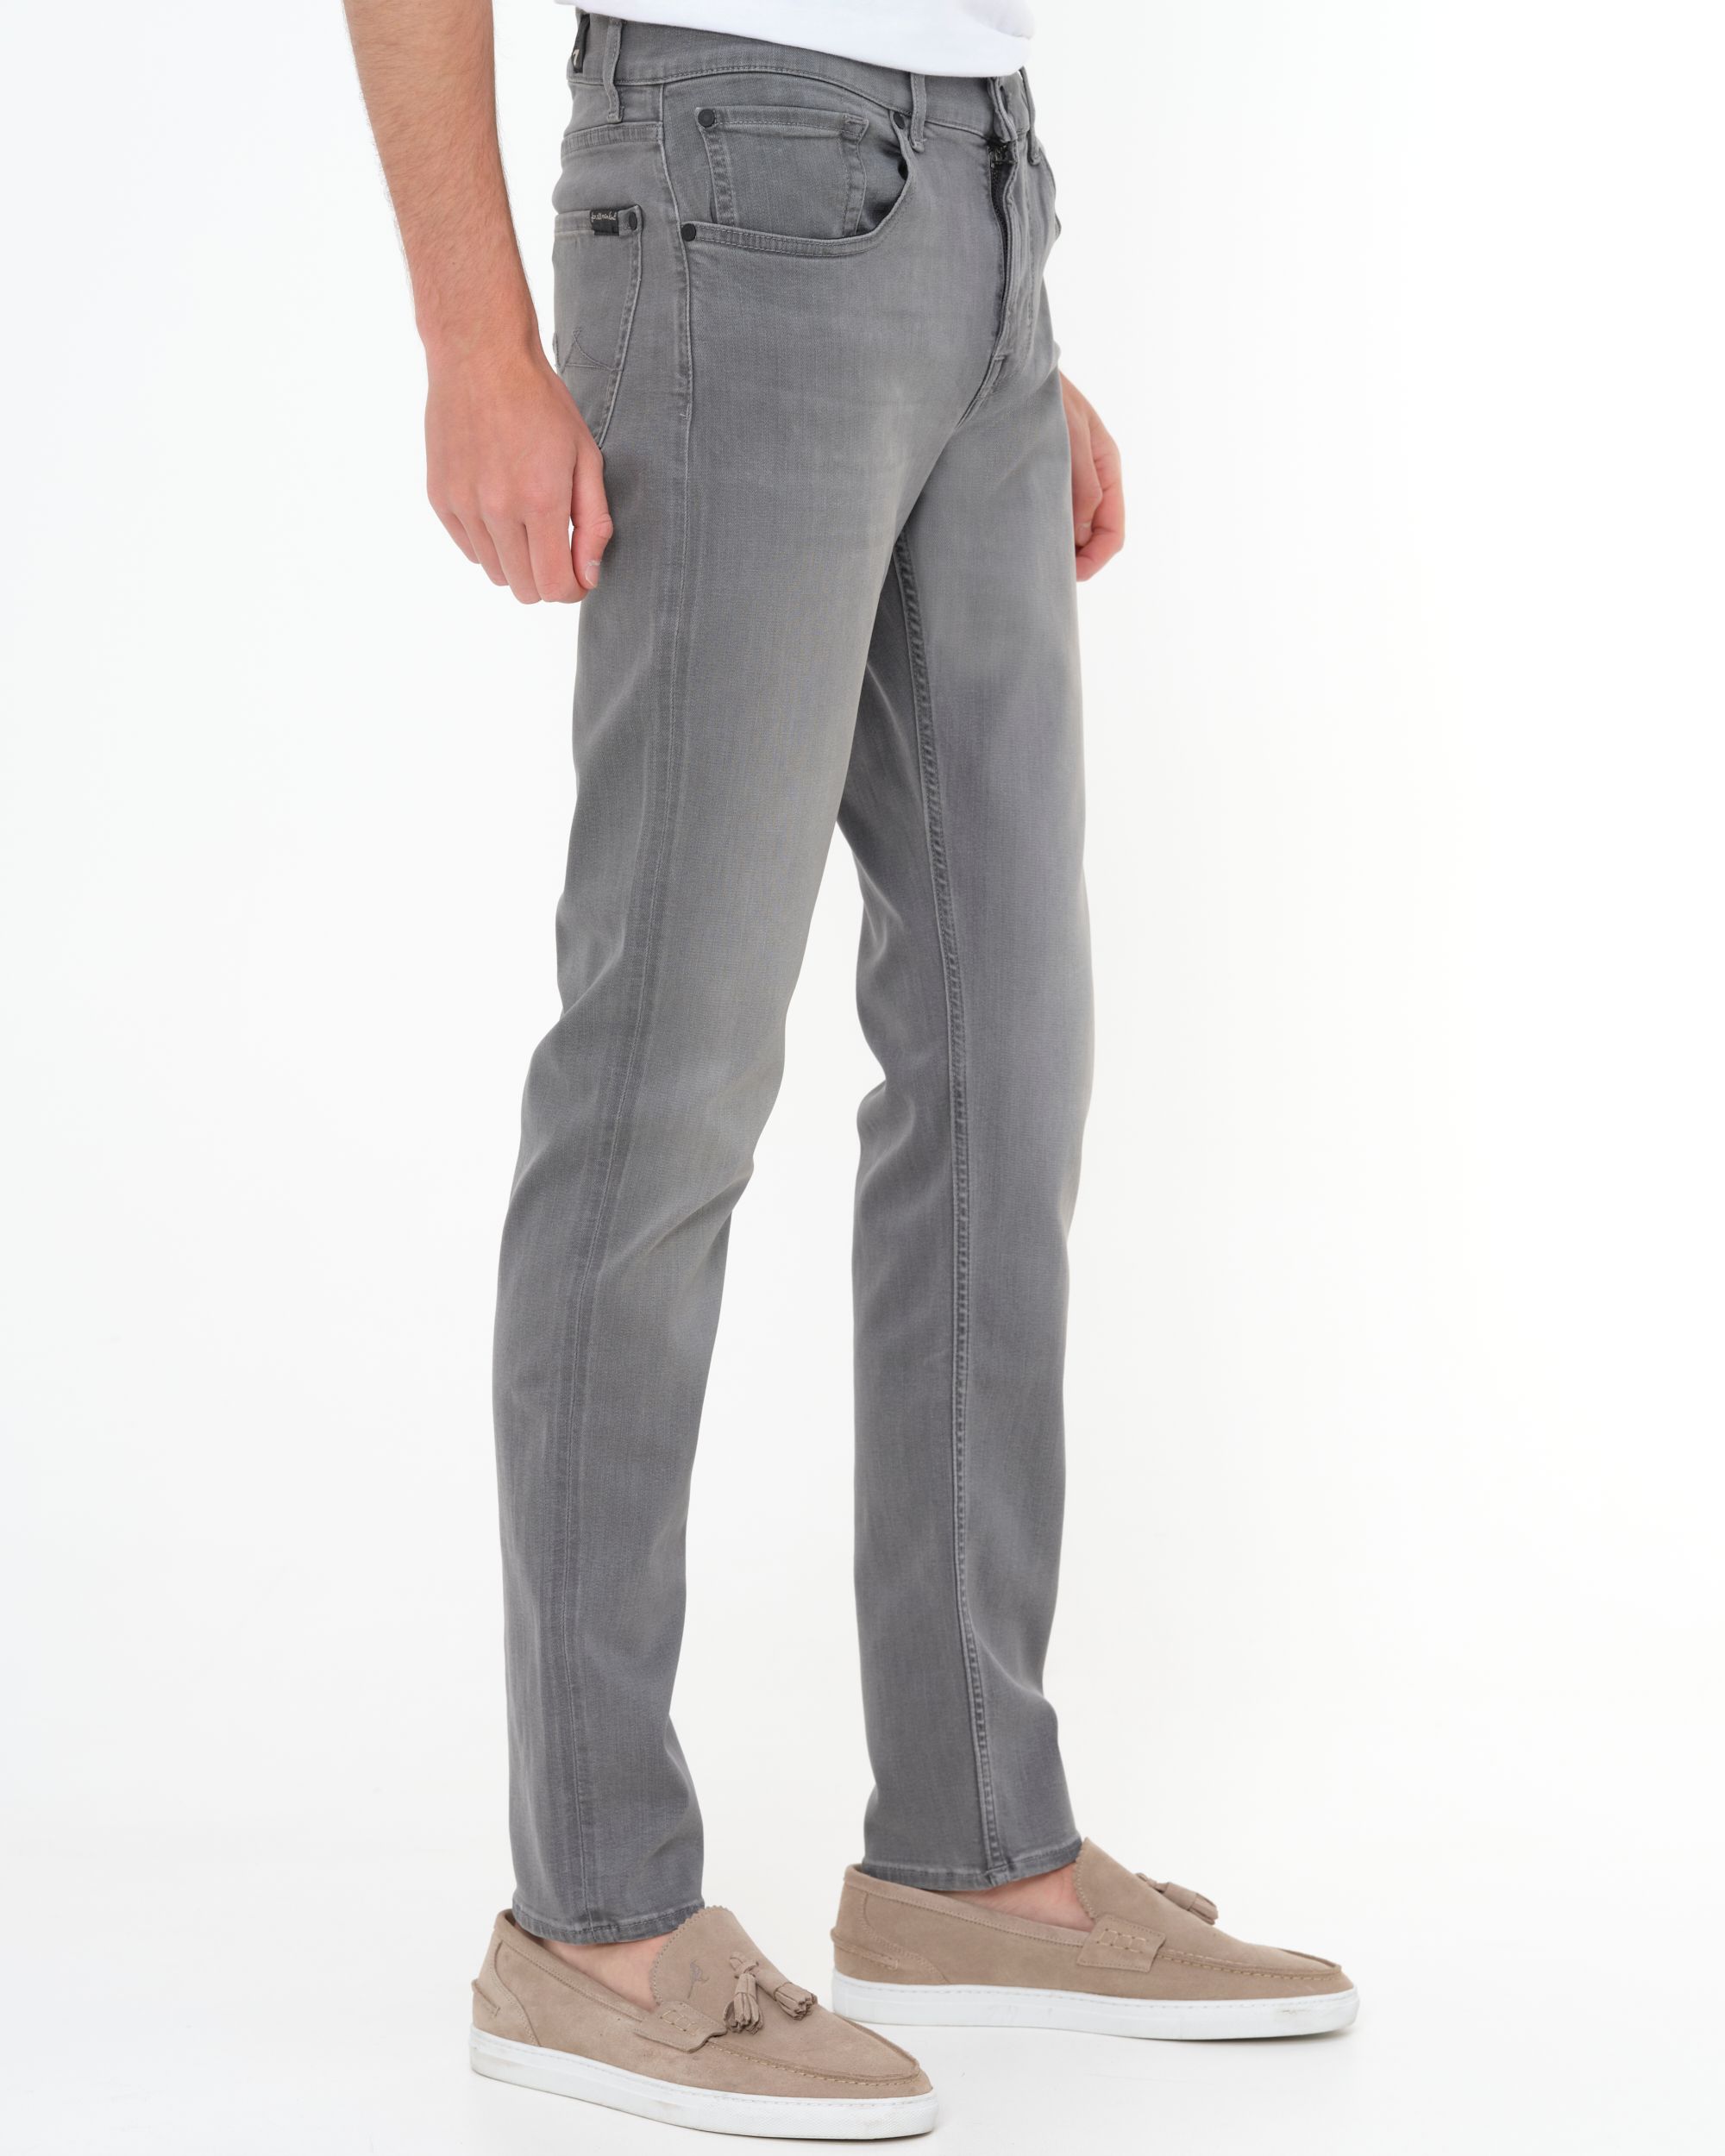 Seven for all Mankind Jeans Grijs 081443-001-30